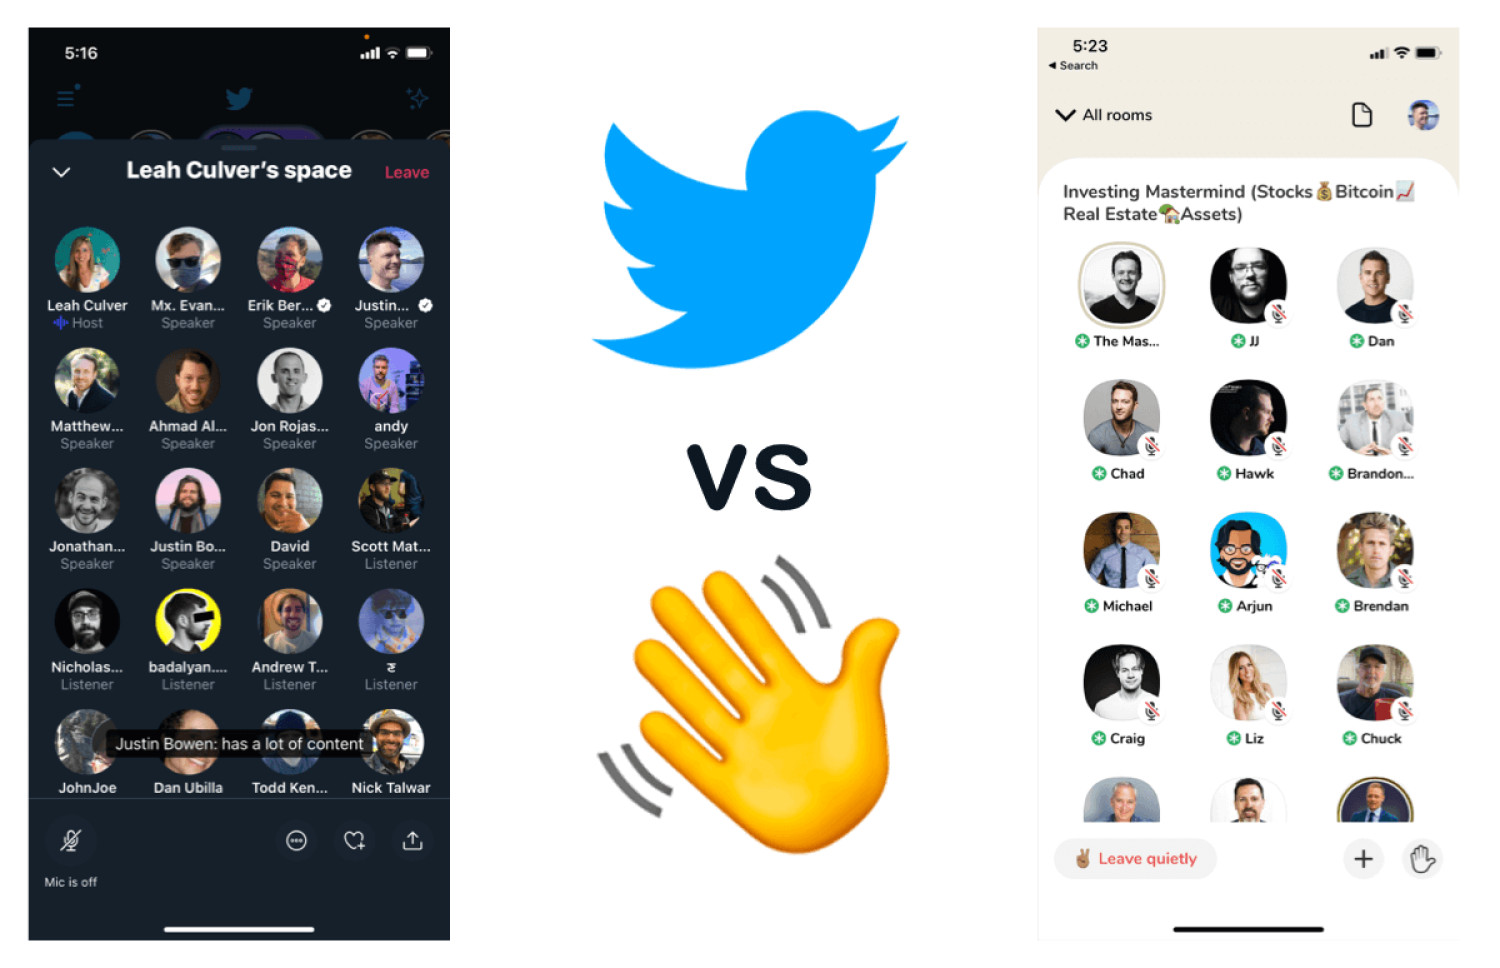 Twitter Spaces vs Clubhouse audio social apps